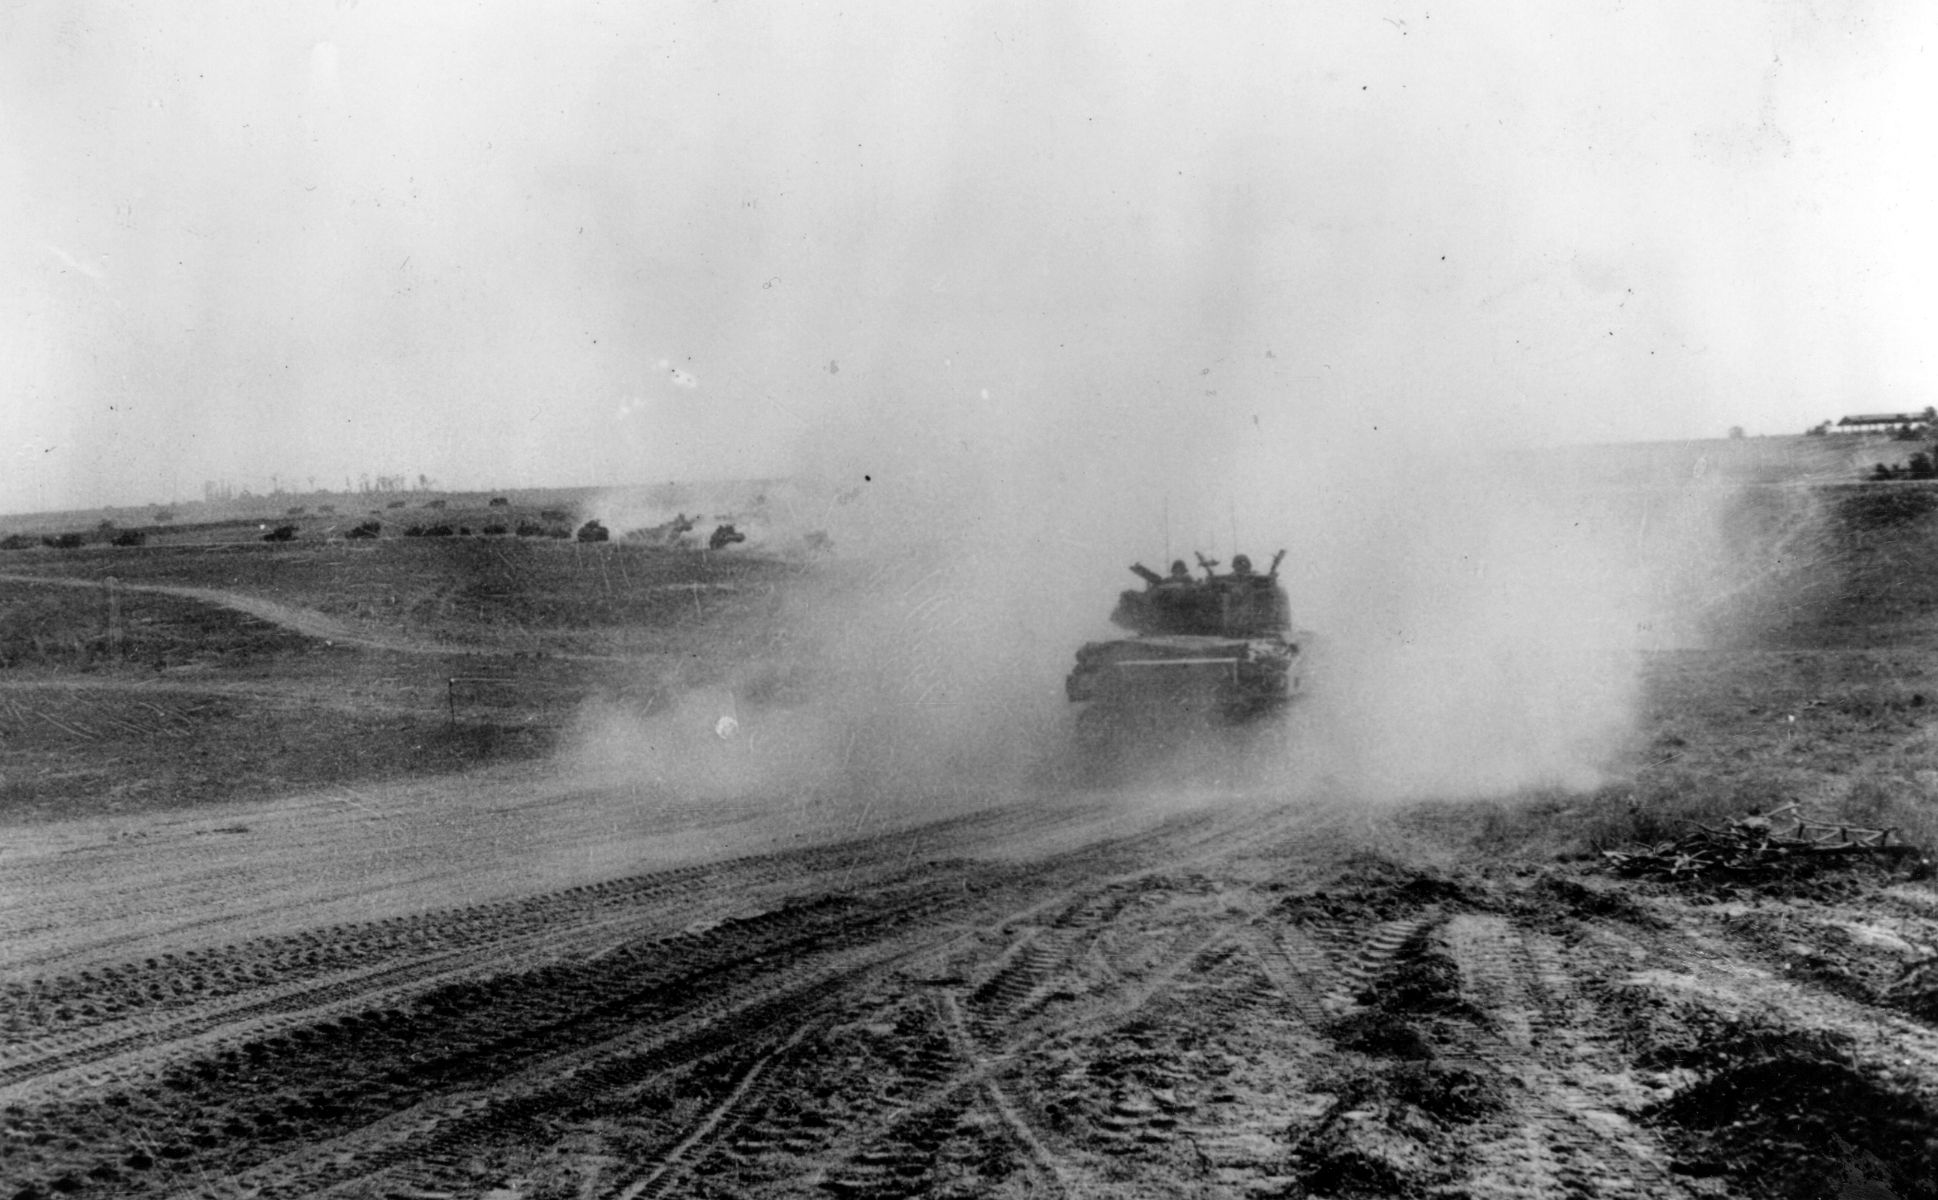 Canadian armored forces raise a cloud of dust as they take up battle positions in the drive to Falaise in August 1944.